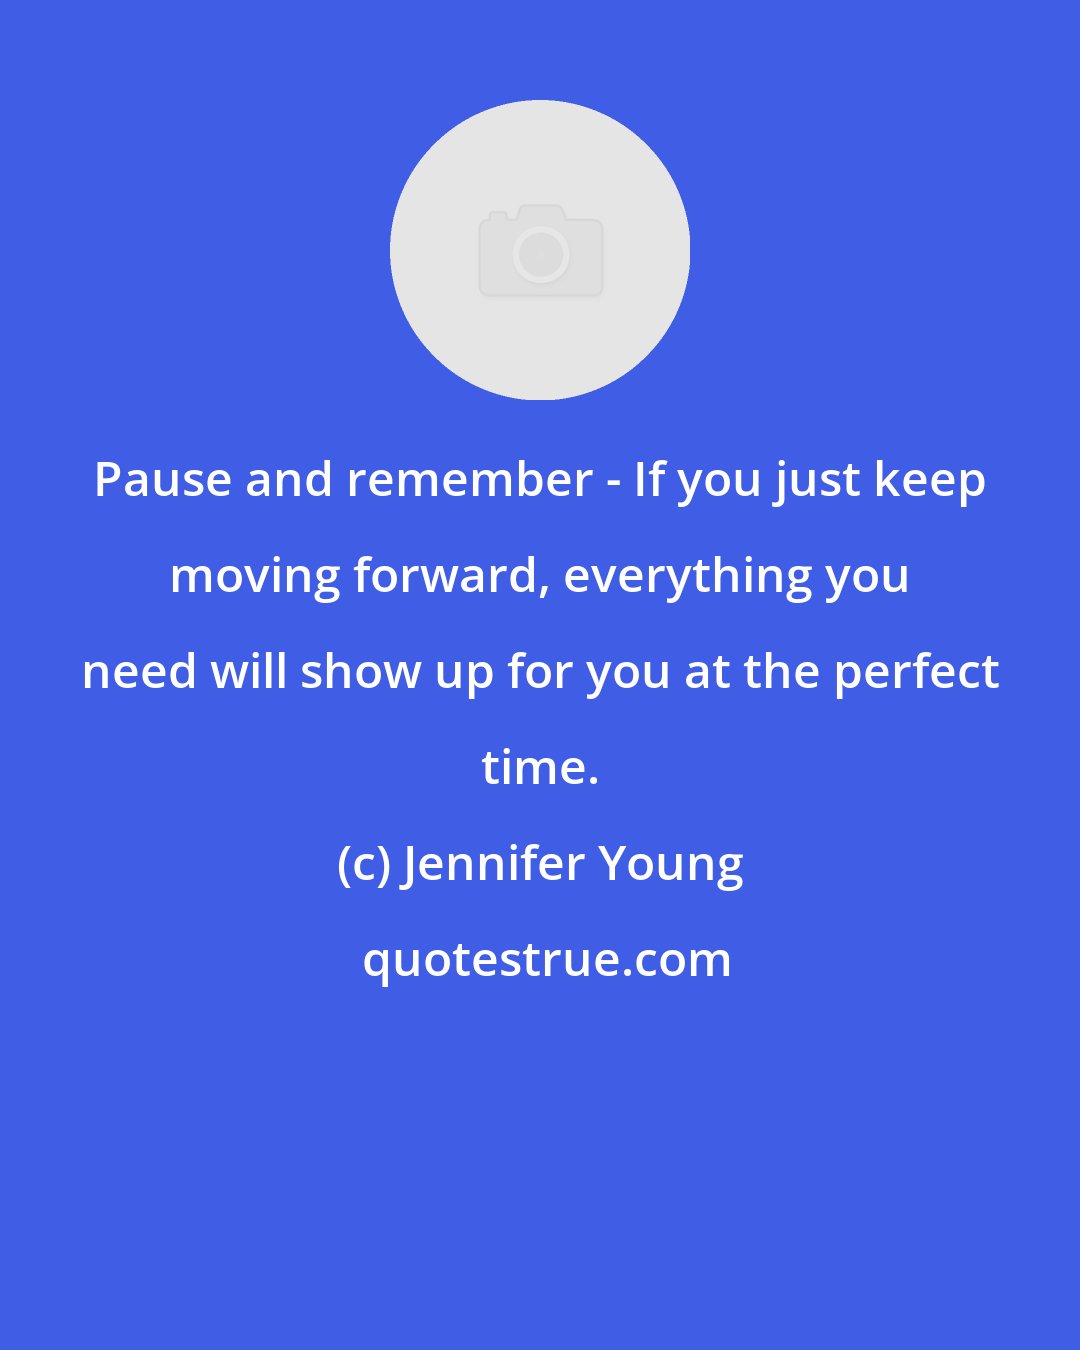 Jennifer Young: Pause and remember - If you just keep moving forward, everything you need will show up for you at the perfect time.